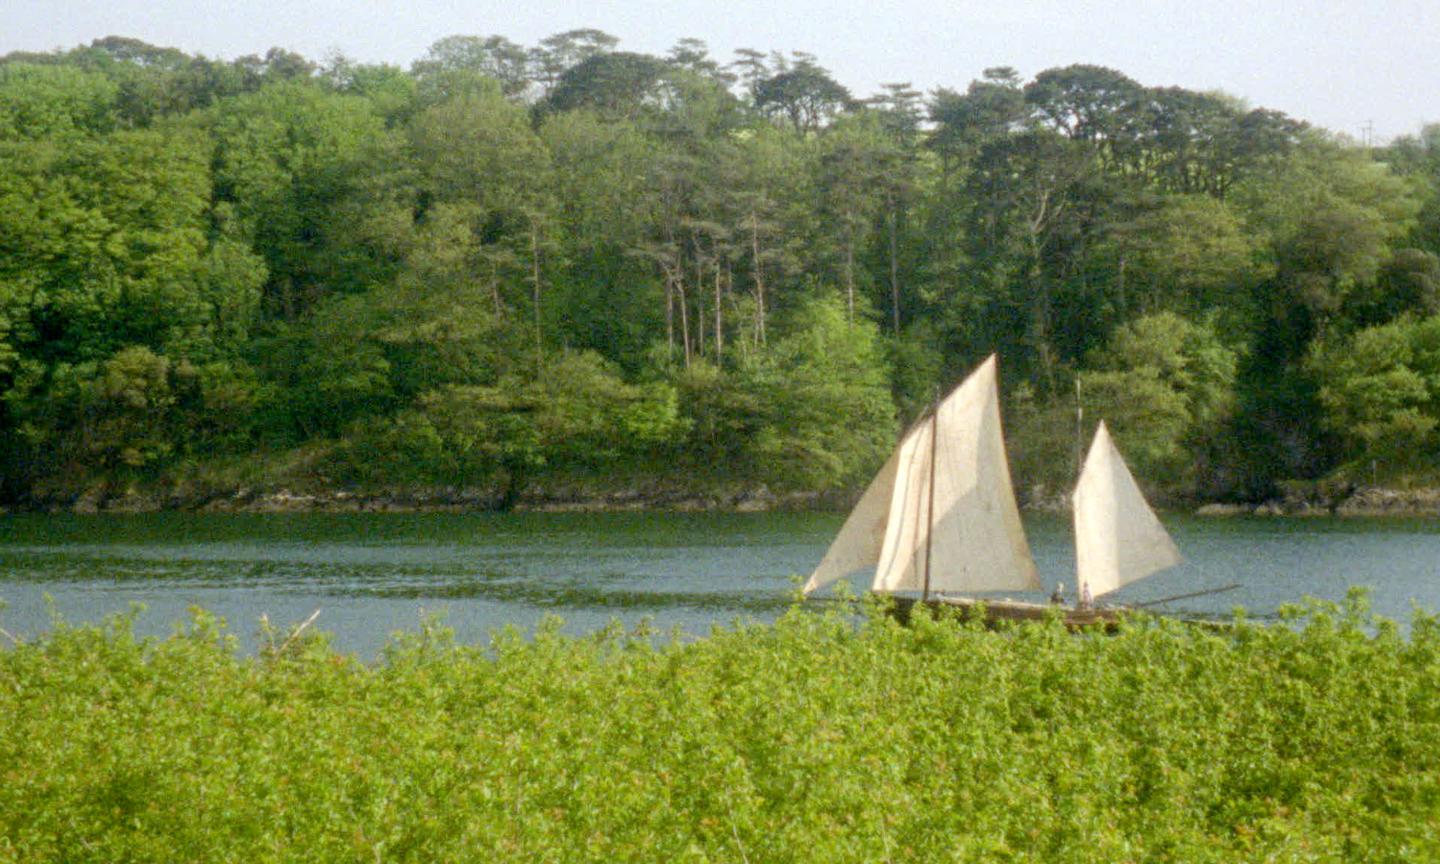 There are green trees and plants in the foreground and background, with a river running through the middle and a small sailing vessel with three white sails passing through. 